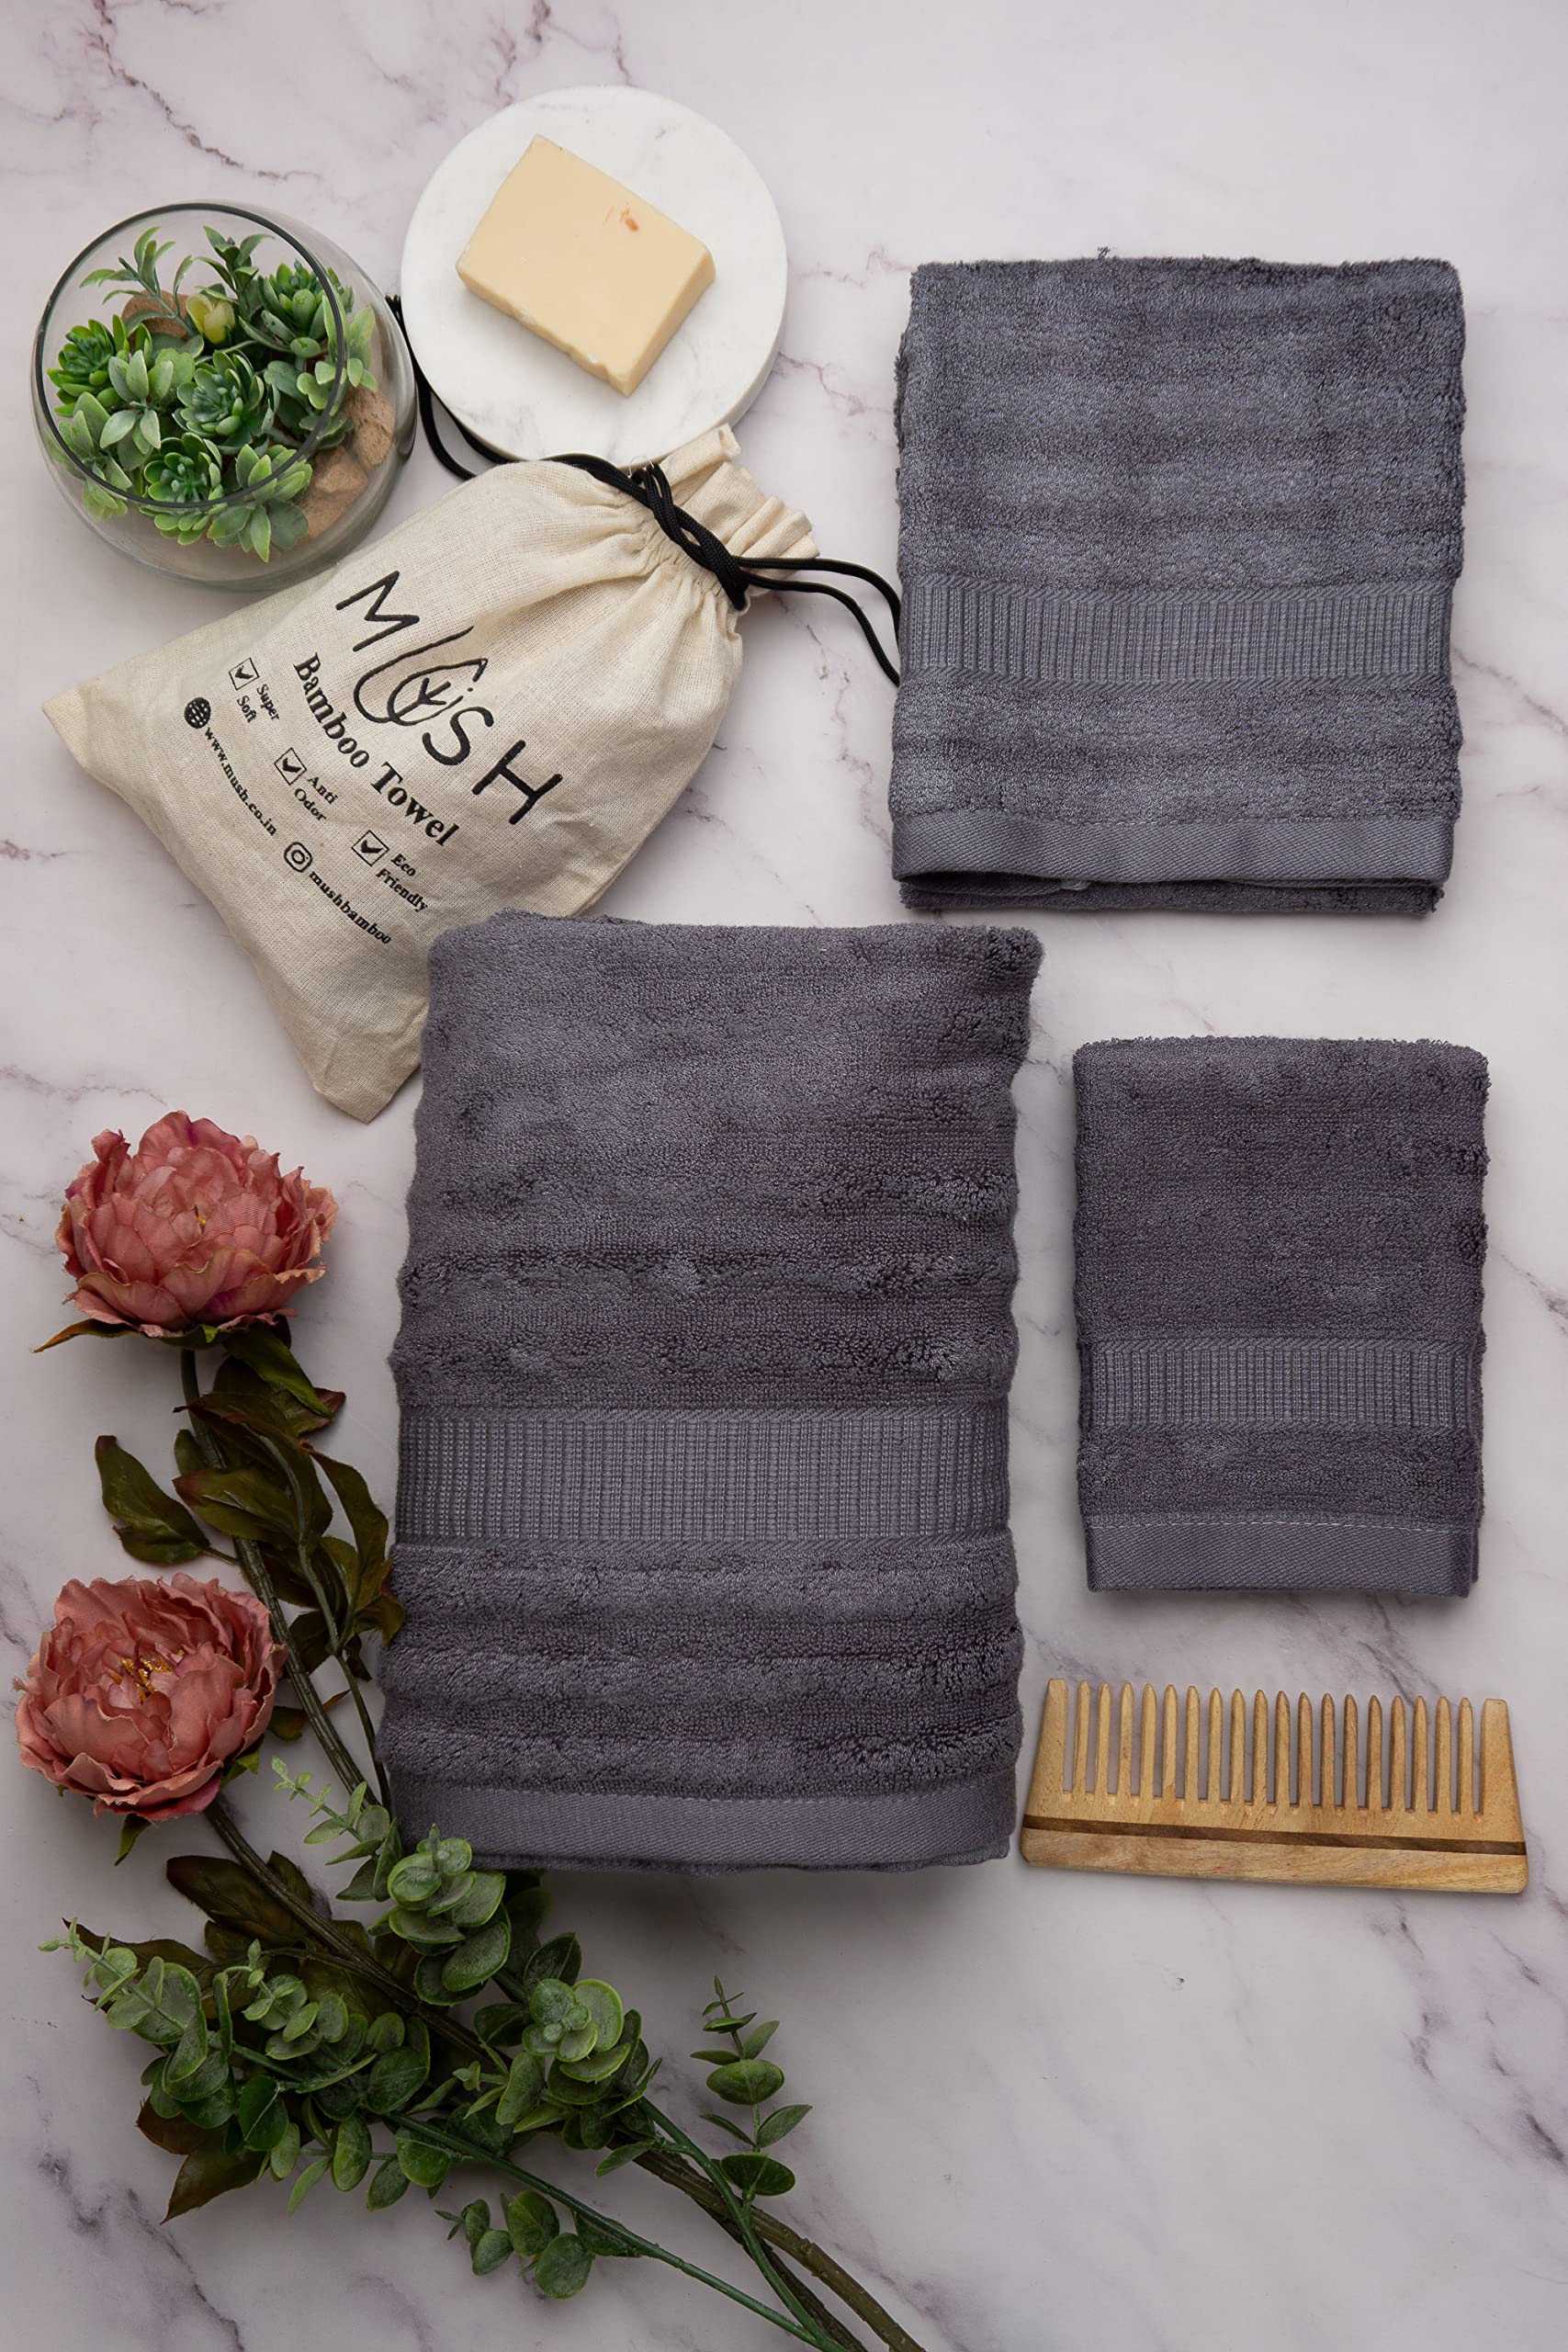 Mush Ultra Soft & Super Absorbent | 600 GSM Bamboo Bath Towel Set | 29 X 59 Inches (Space Grey)